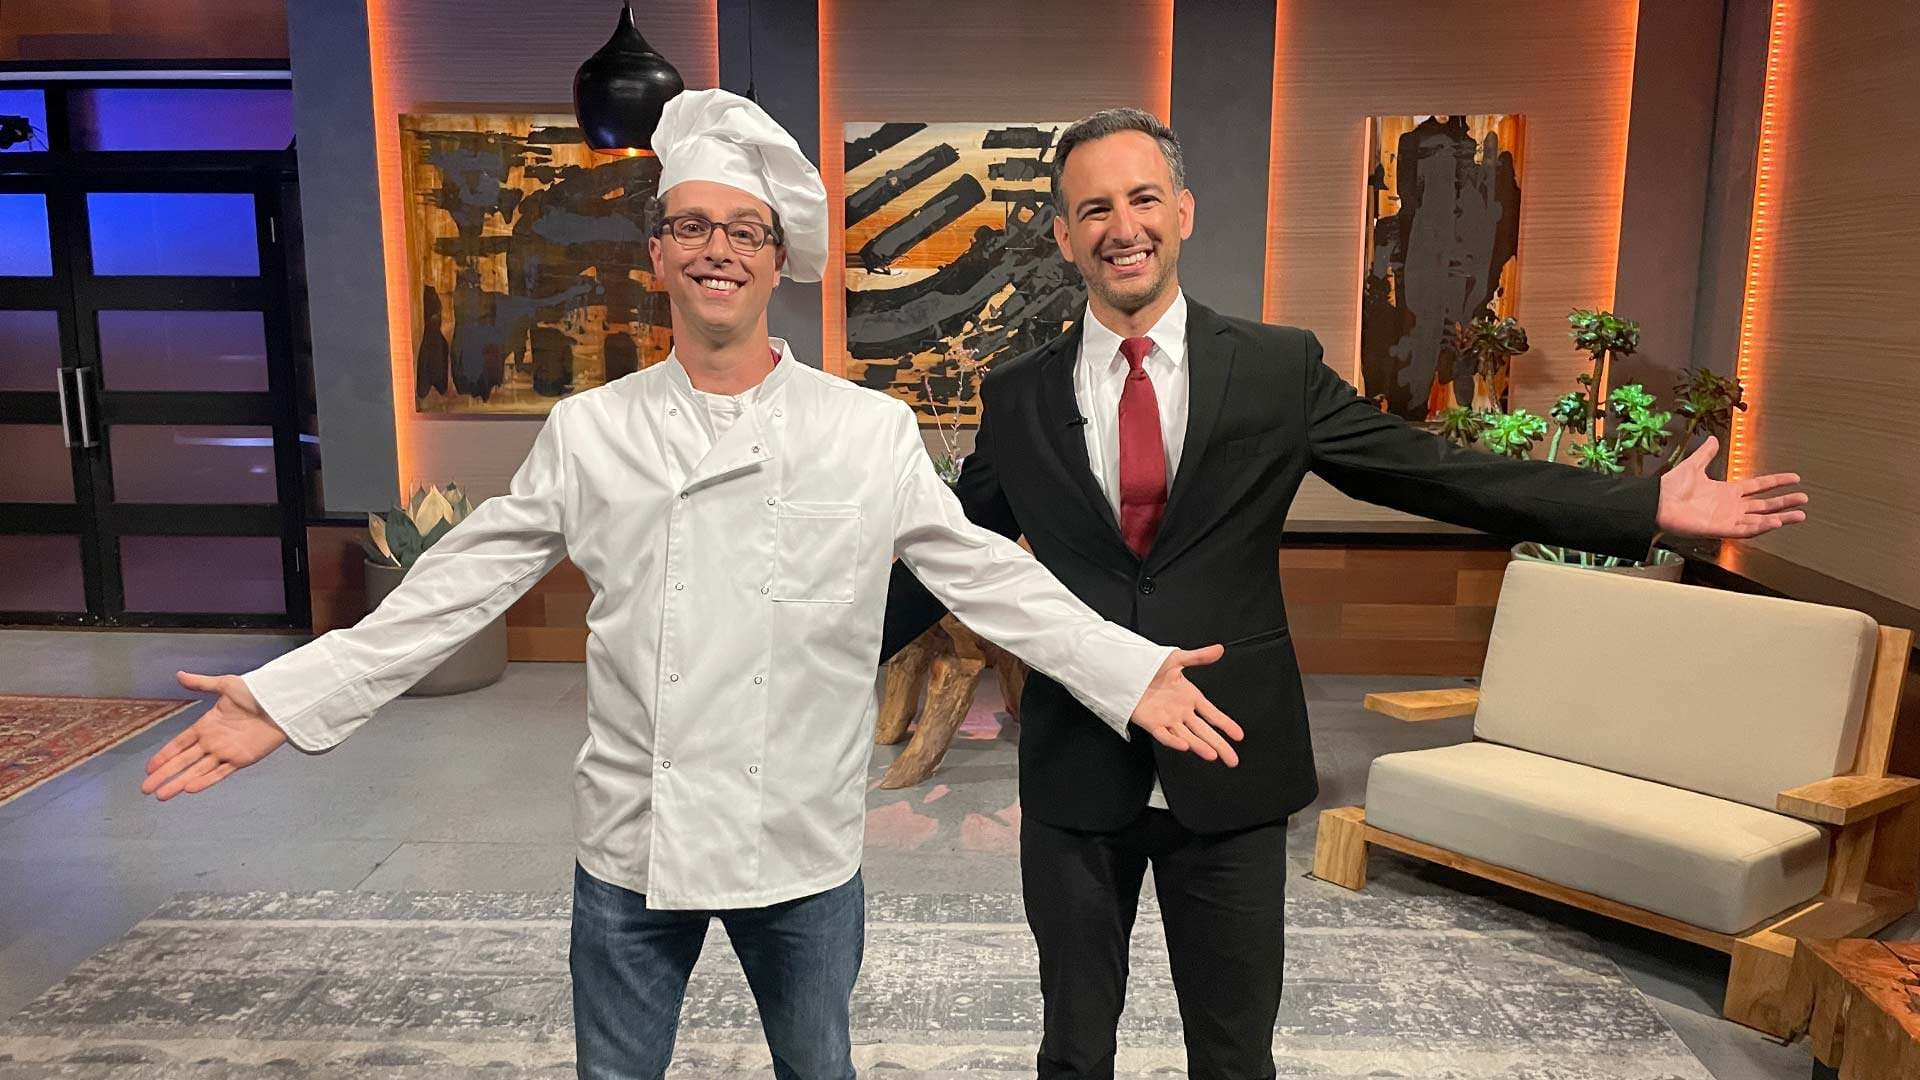 Ethan Frisch, wearing a chef's outfit, poses with Burlap and Barrel co-founder Ori Zohar on "Shark Tank" set